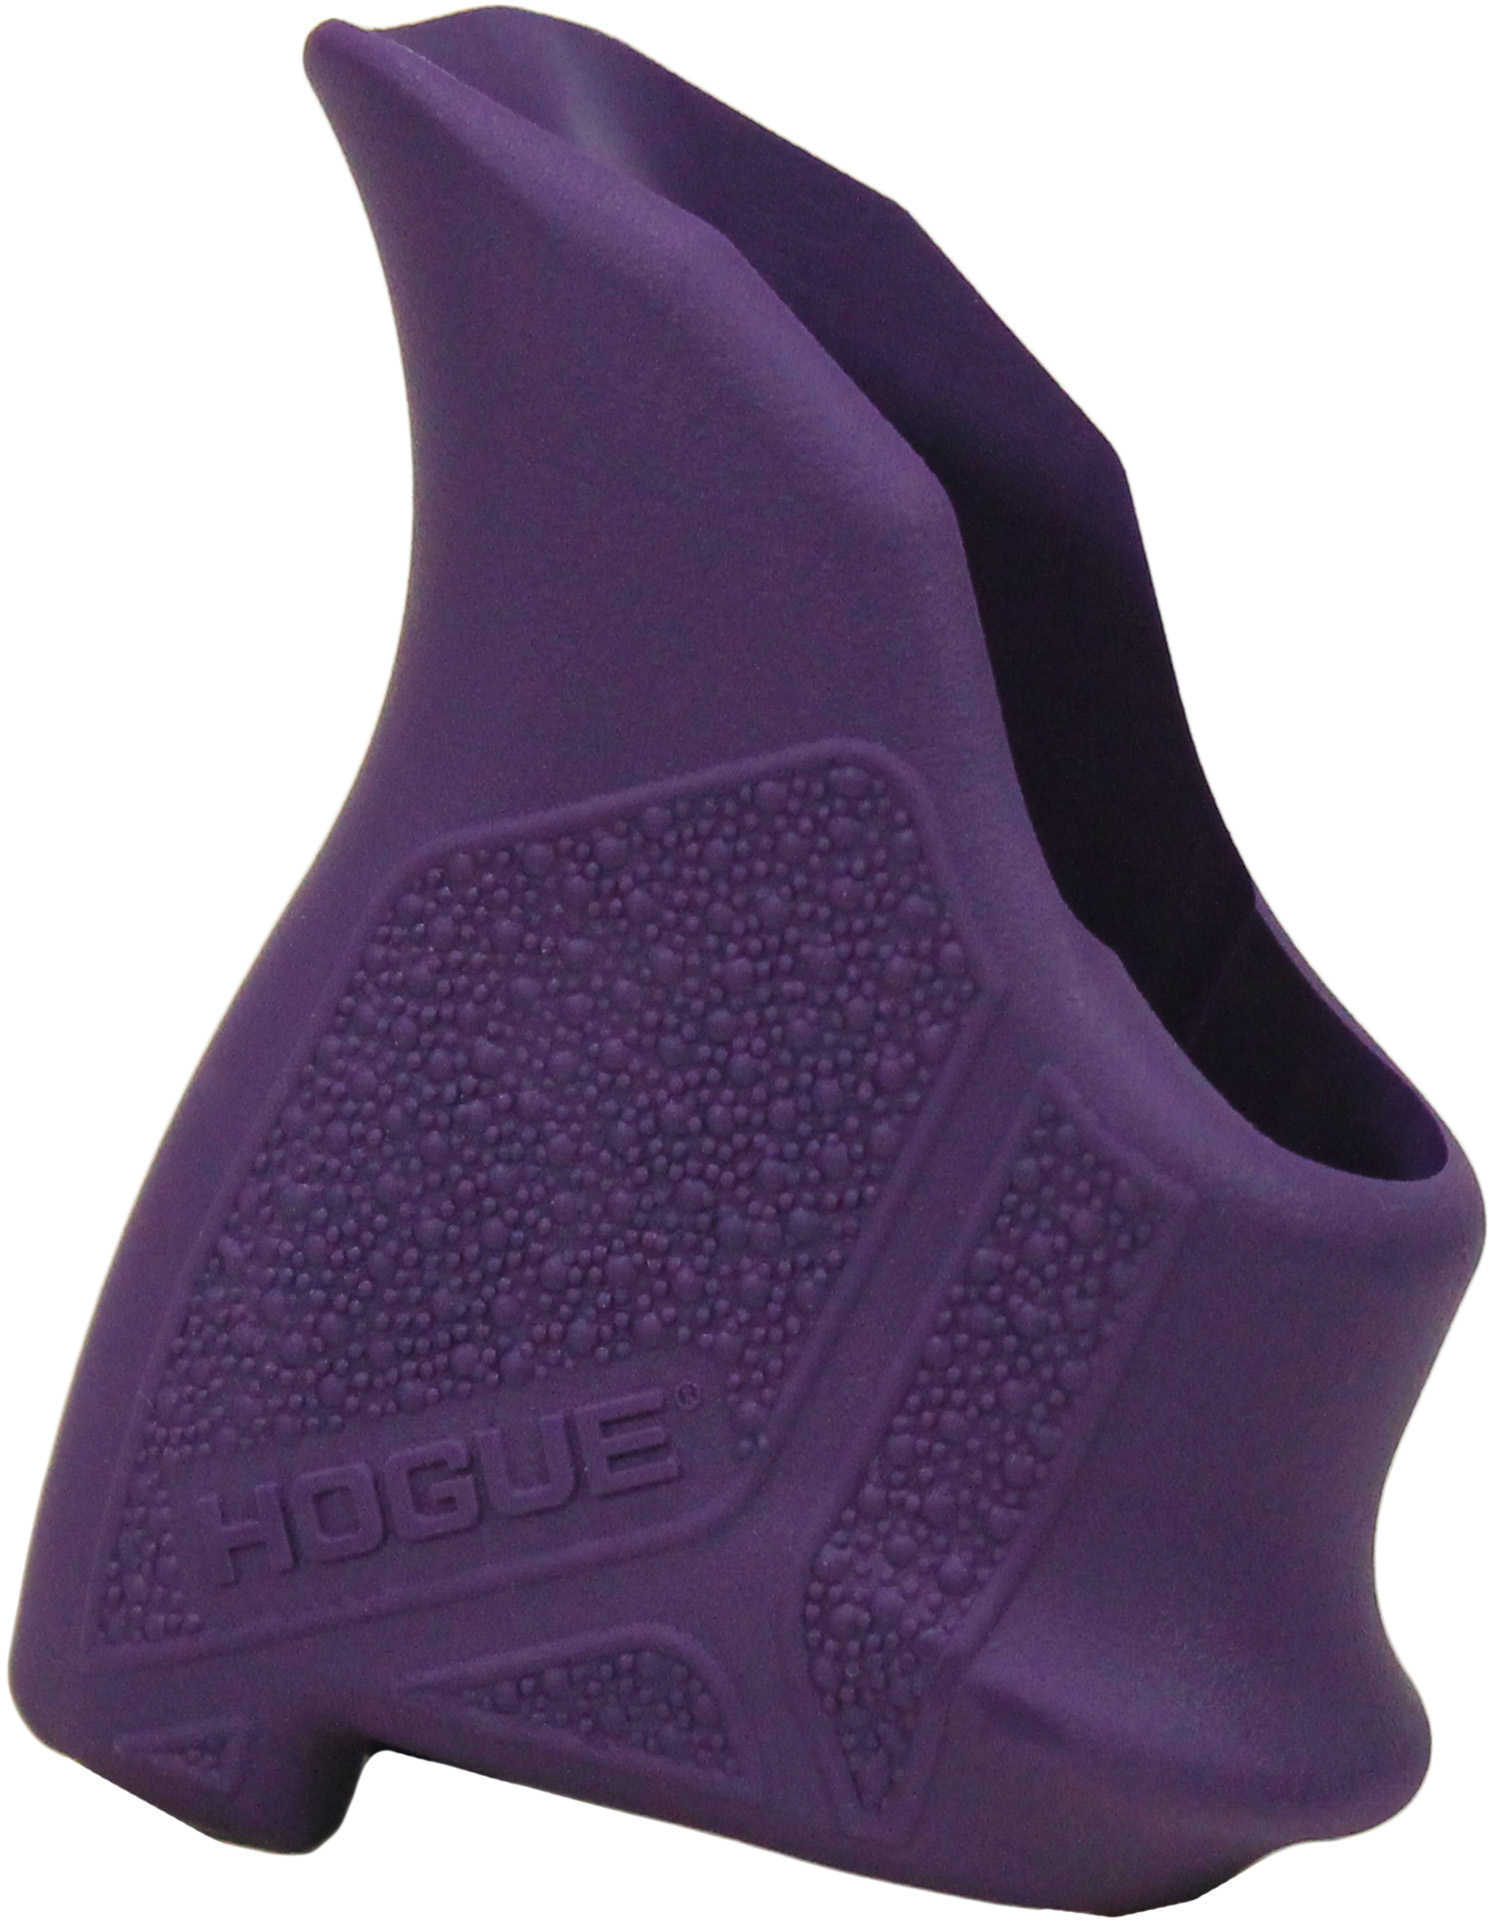 Hogue HandAll Beavertail Grip Sleeve For Ruger LCP II-Purple